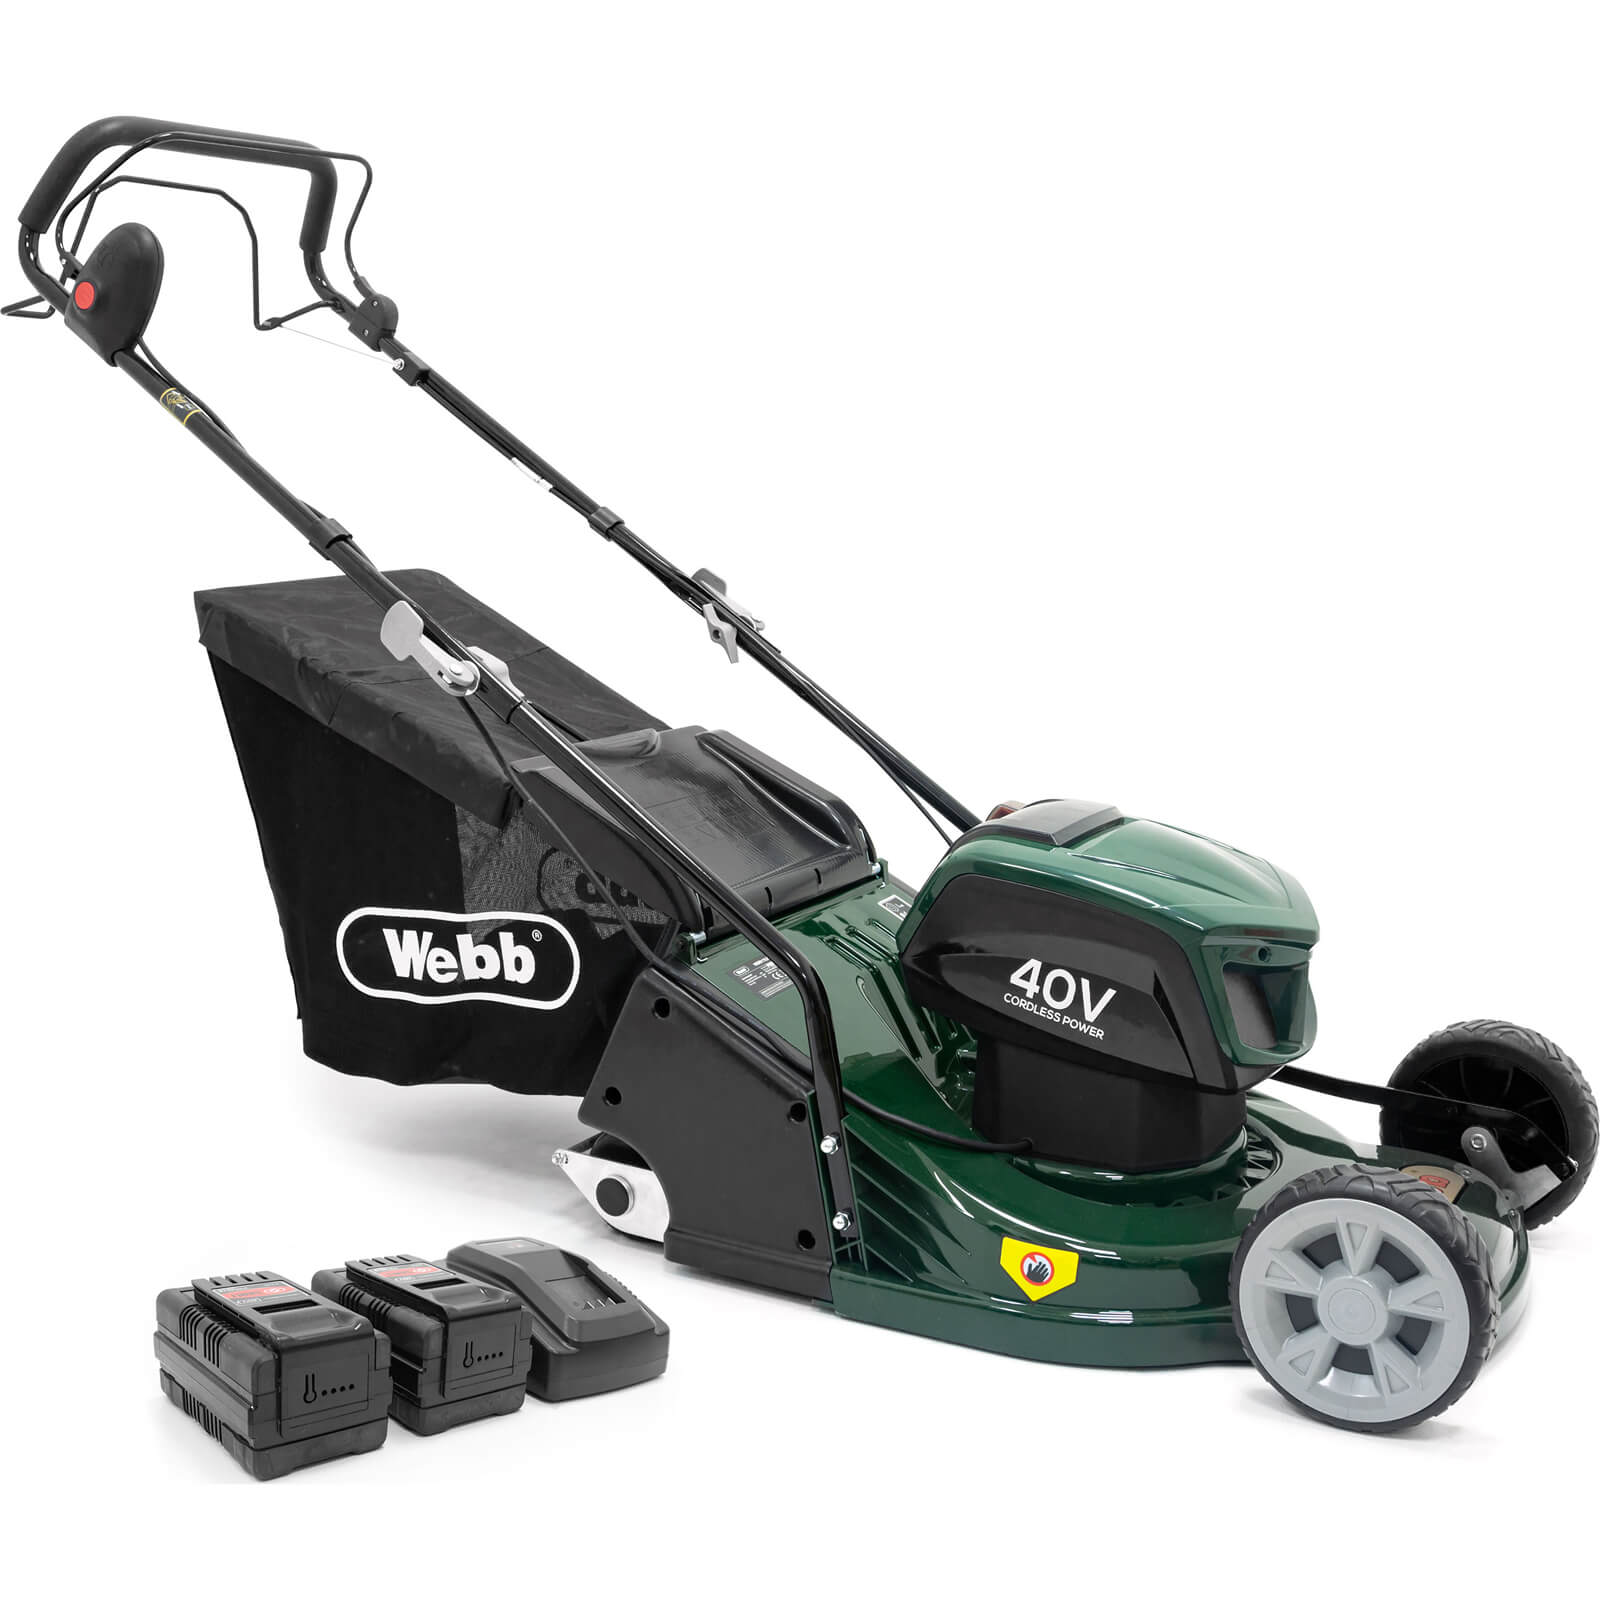 Image of Webb WERR17LISPX2 40v Cordless Self Propelled Rotary Lawnmower 2 x 4ah Li-ion Charger